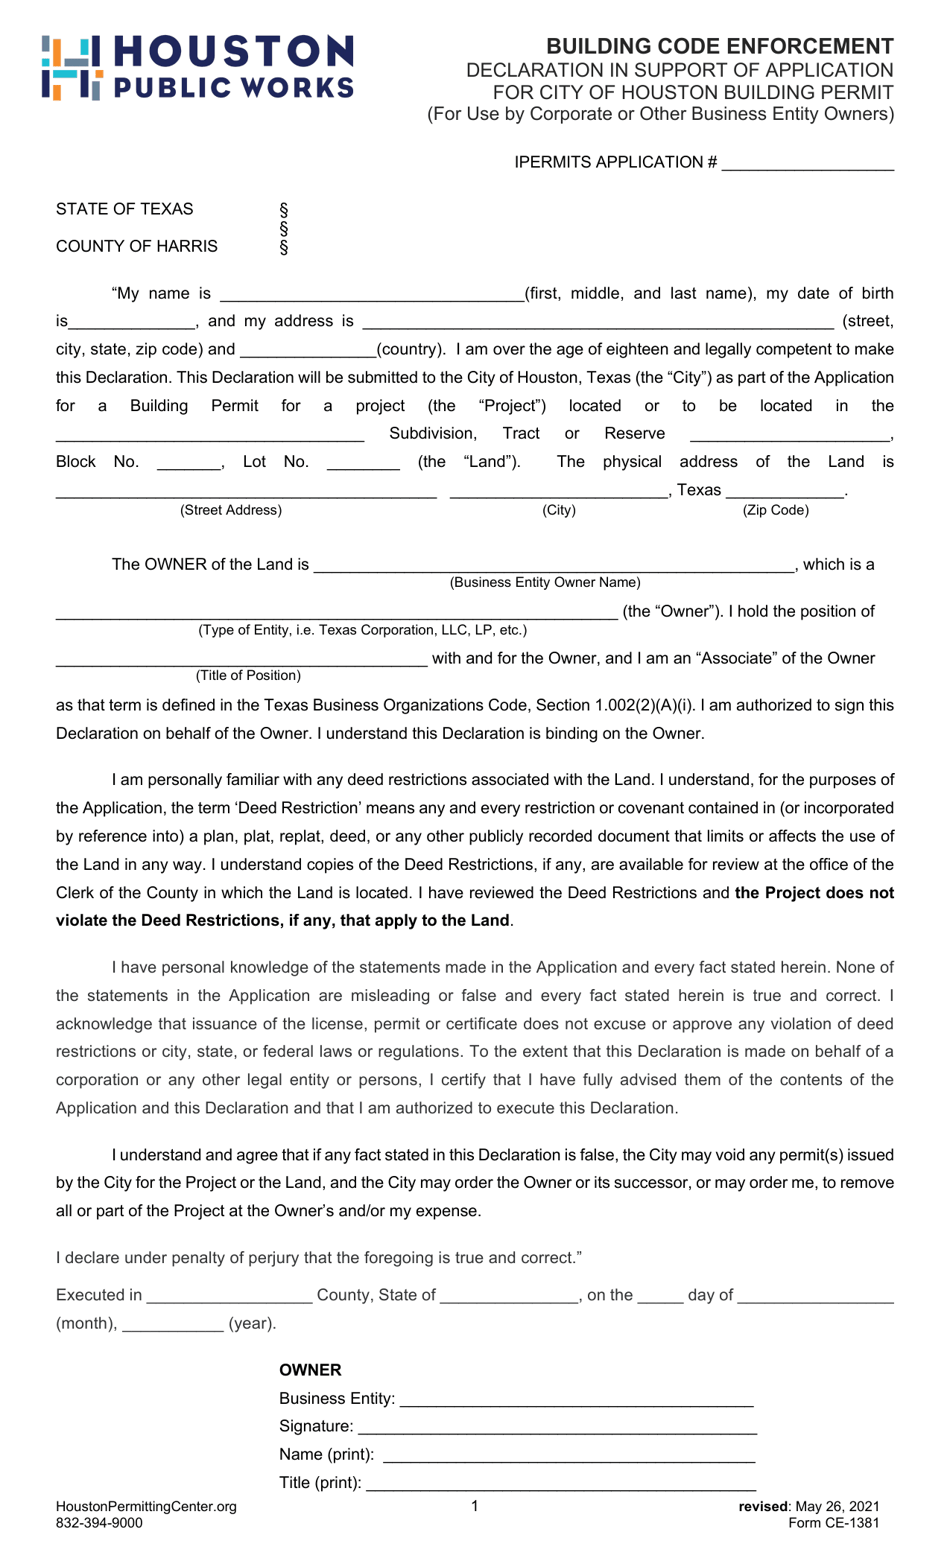 Form CE-1381 Declaration in Support of Application for City of Houston Building Permit (For Use by Corporate or Other Business Entity Owners) - City of Houston, Texas, Page 1